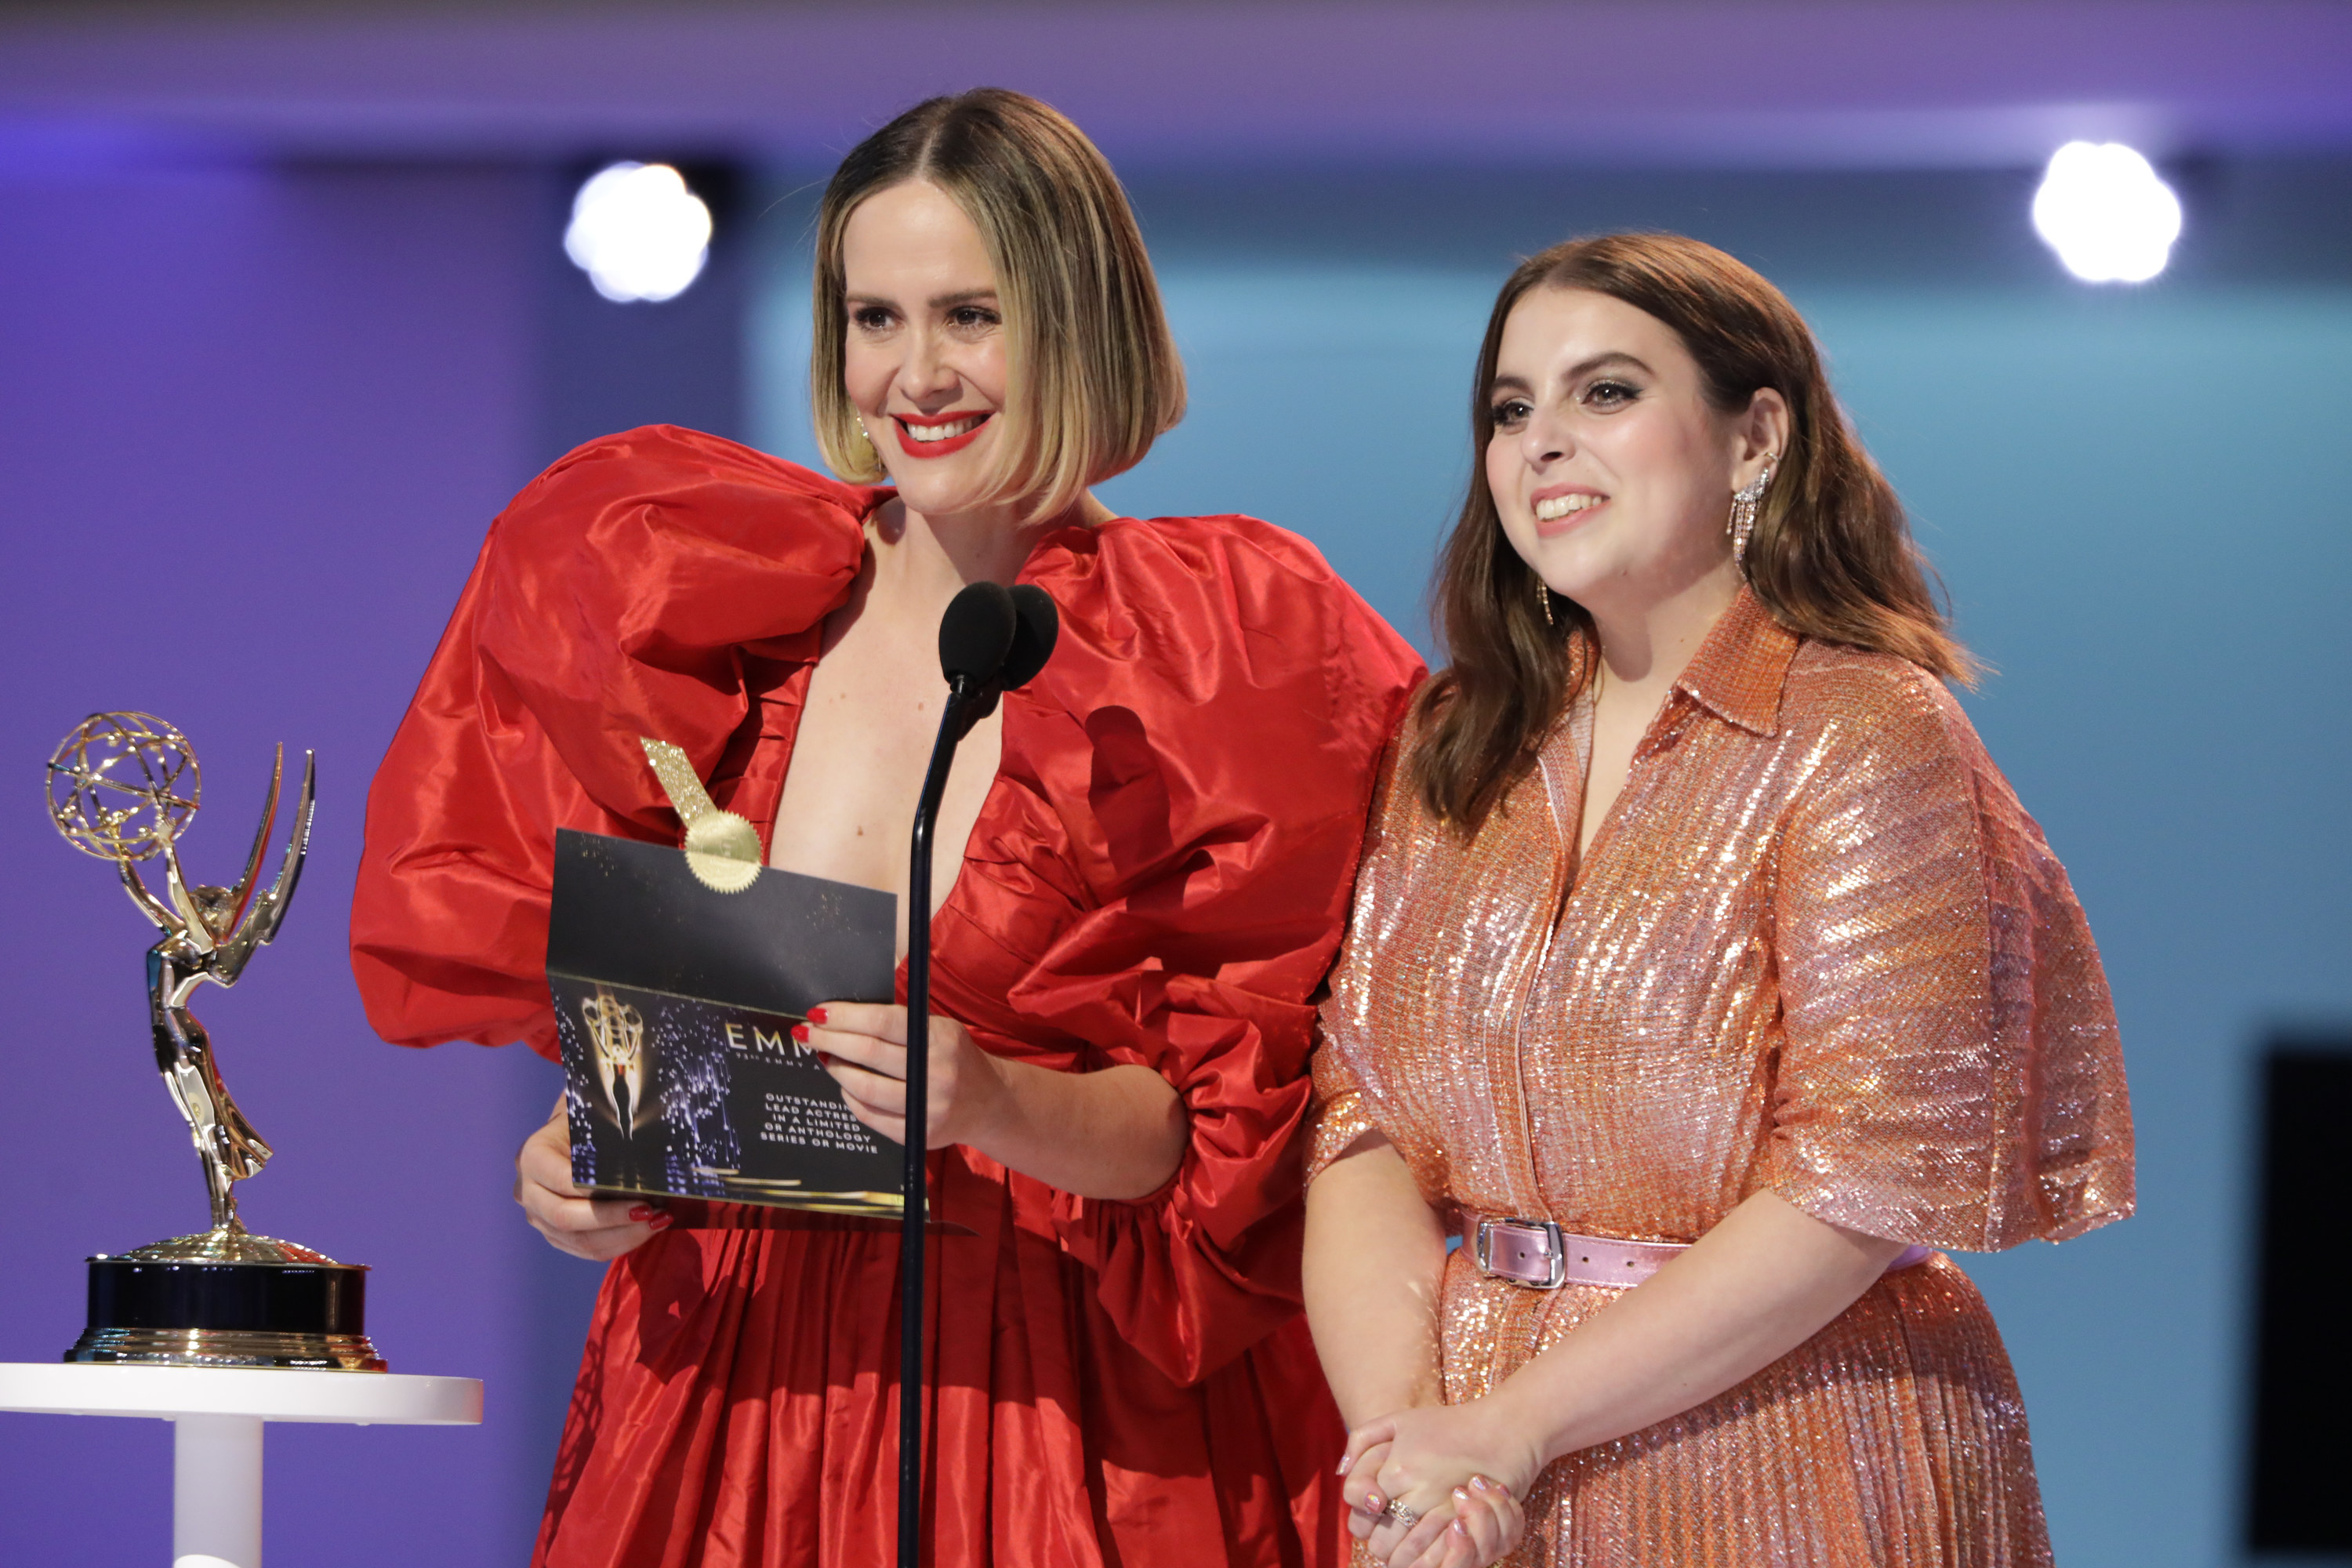 Sarah and Beanie presenting an Emmy award together onstage